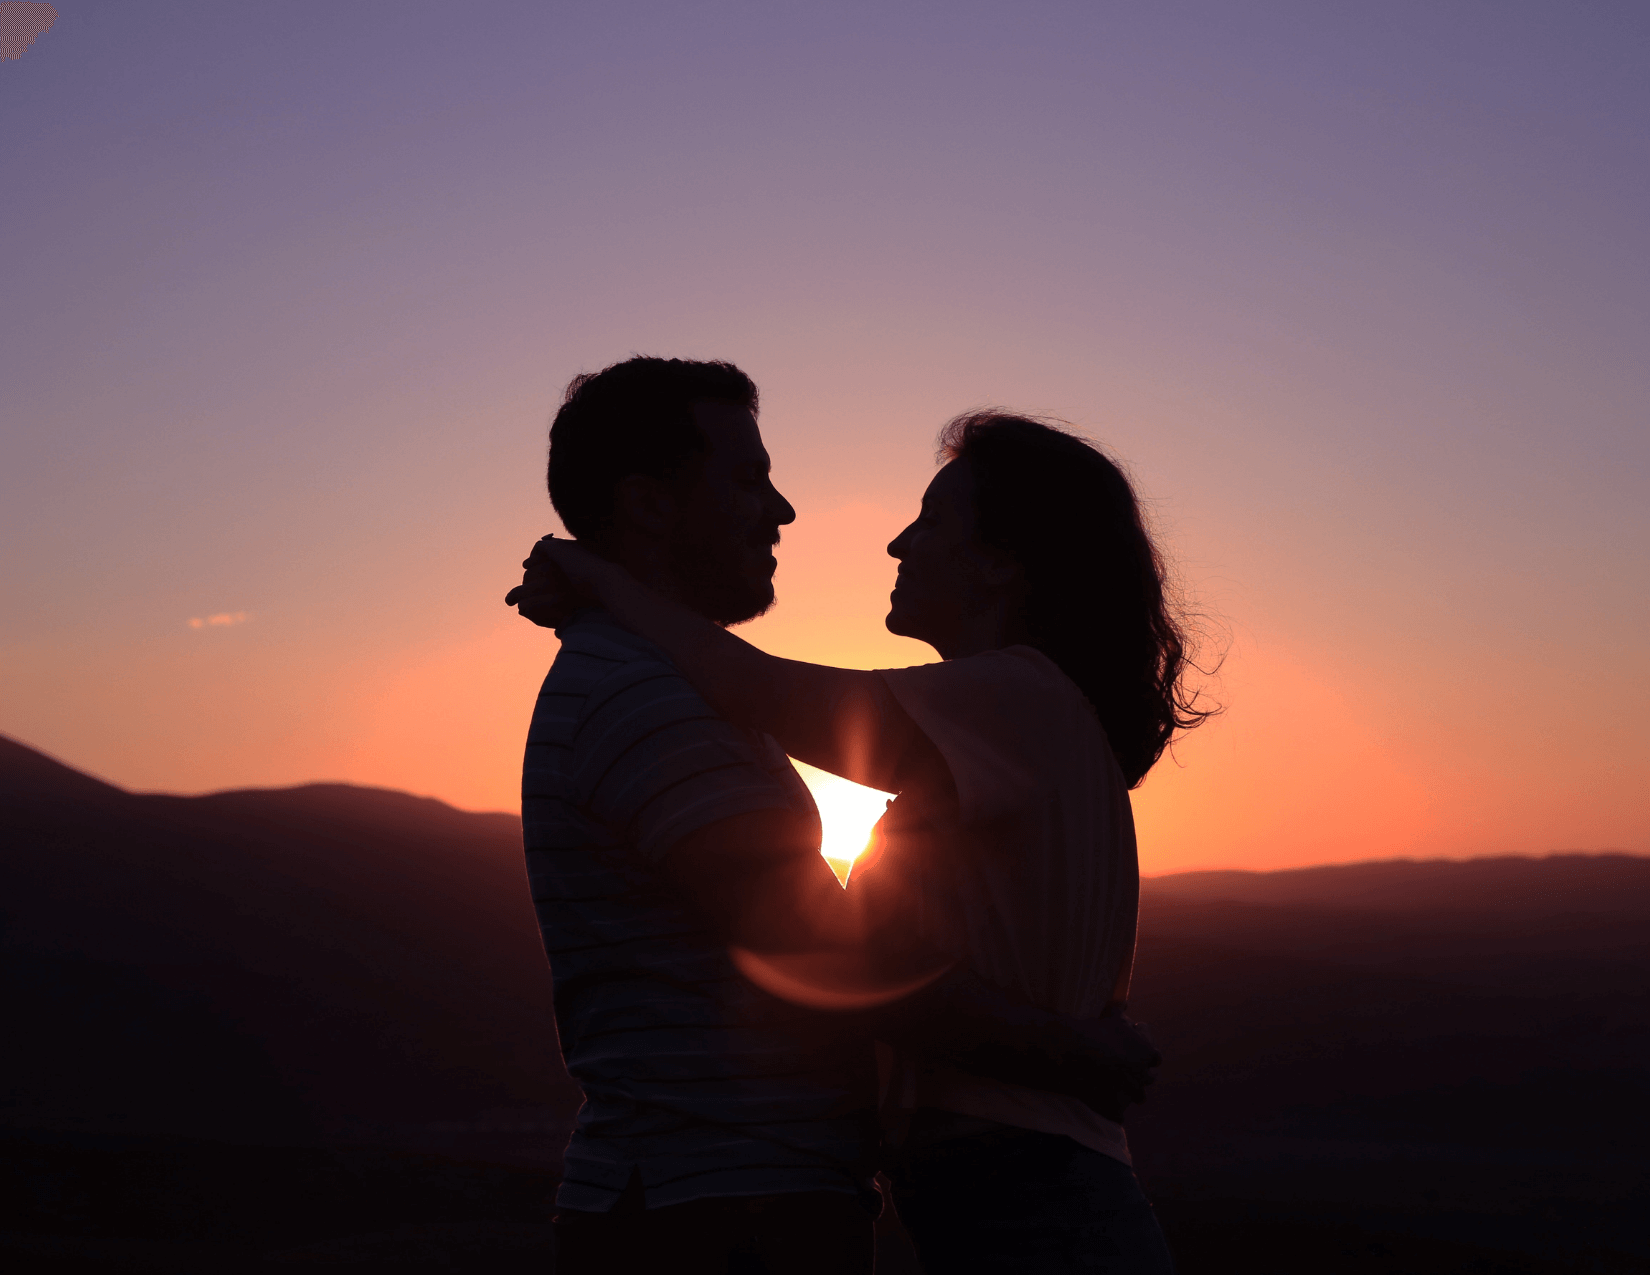 Silhouette of a couple embracing in front of sunset